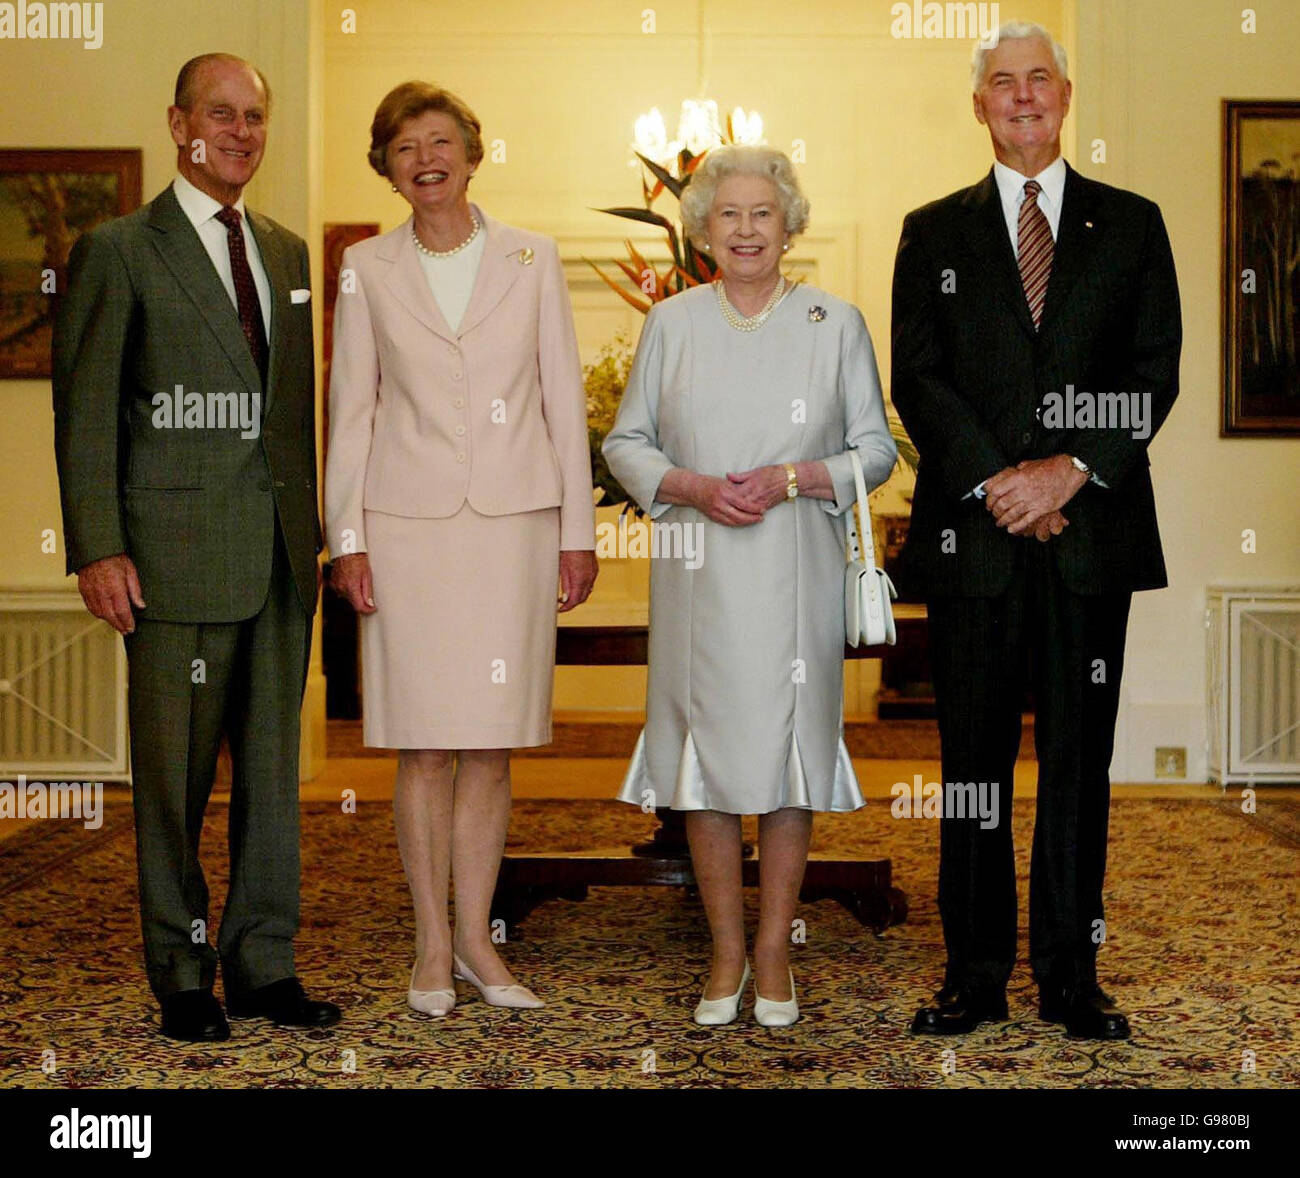 Queen Elizabeth II (second right) and the Duke of Edinburgh (left) pose for a photograph with the Australian Governor General Michael Jeffrey and his wife, Marlena, before lunch during a visit to Government House in Canberra Tuesday March 14, 2006 as part of the Royal couple's five day tour of the country. See PA story ROYAL Queen. PRESS ASSOCIATION Photo. Photo credit should read: Gareth Fuller / PA. Stock Photo